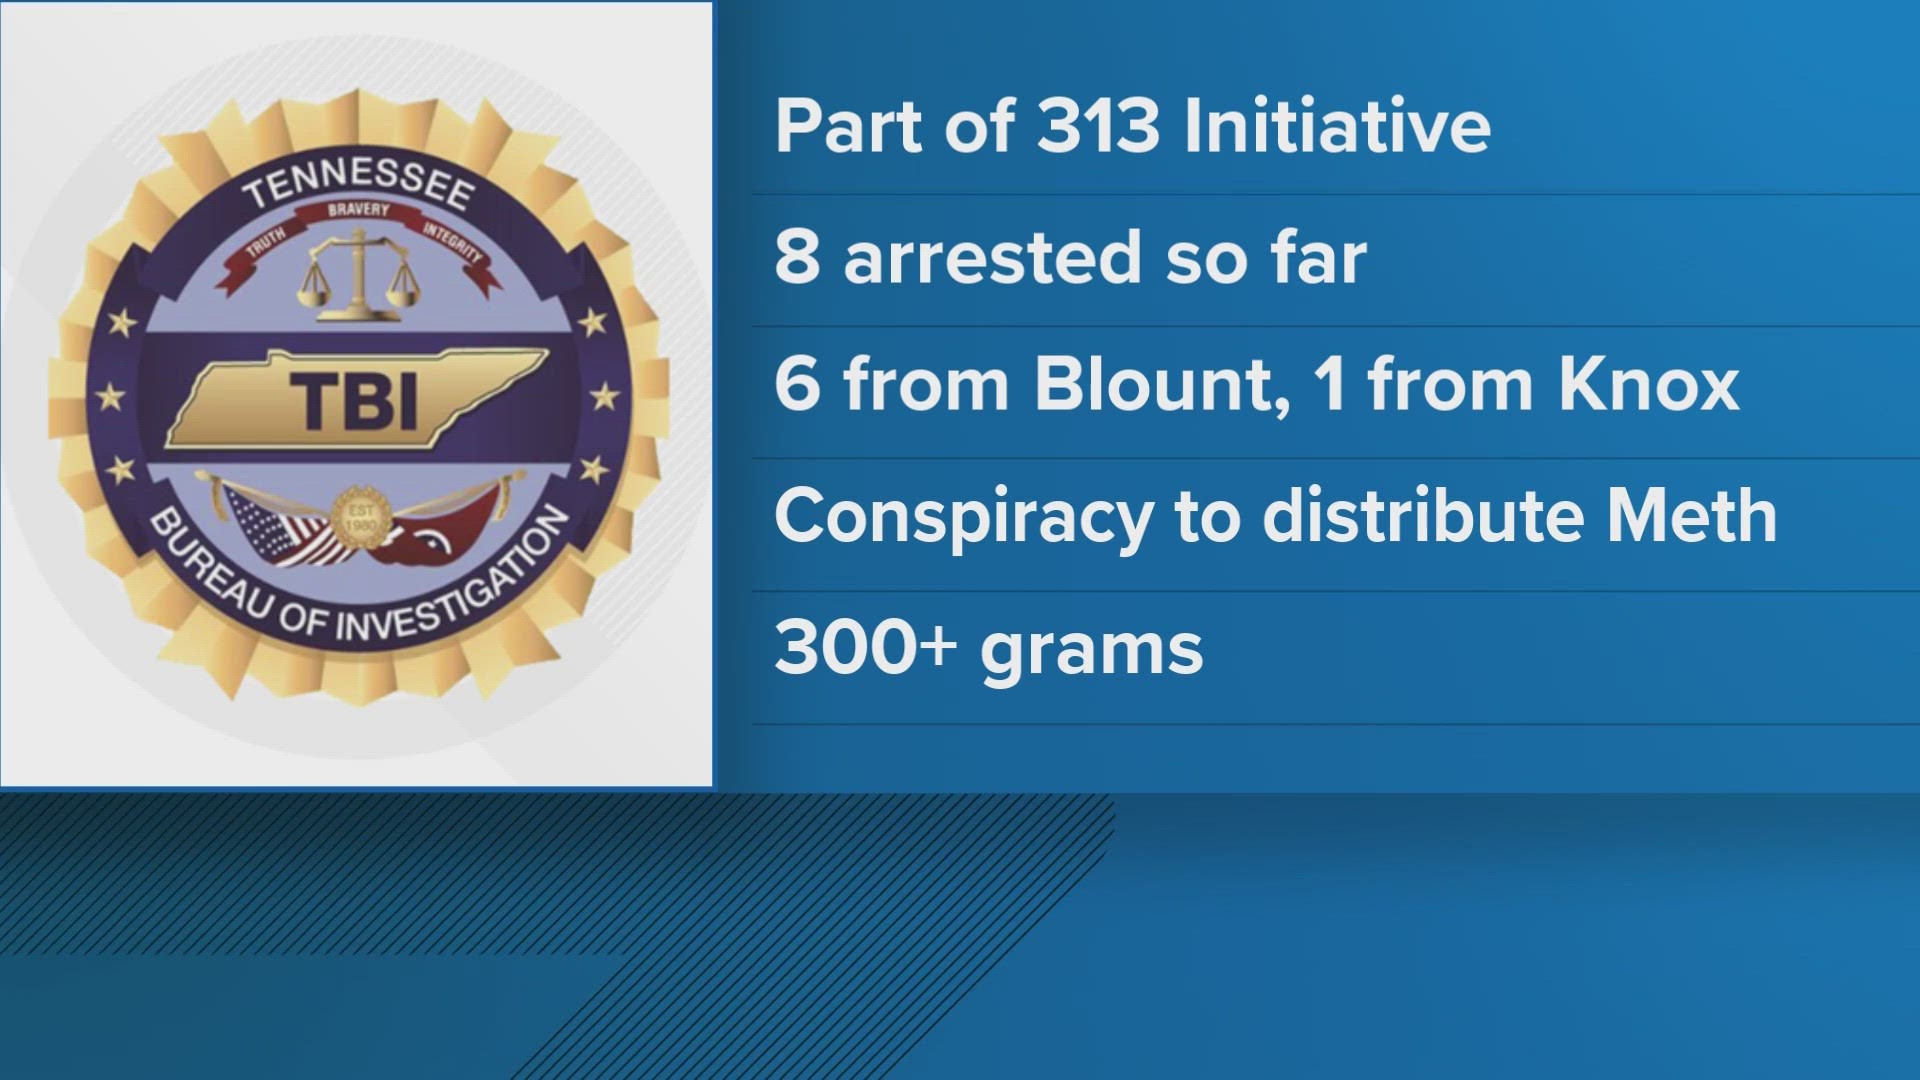 The 313 Initiative is focused on identifying groups of people from the Detroit area who are bringing deadly drug combinations to East Tennessee, the TBI said.